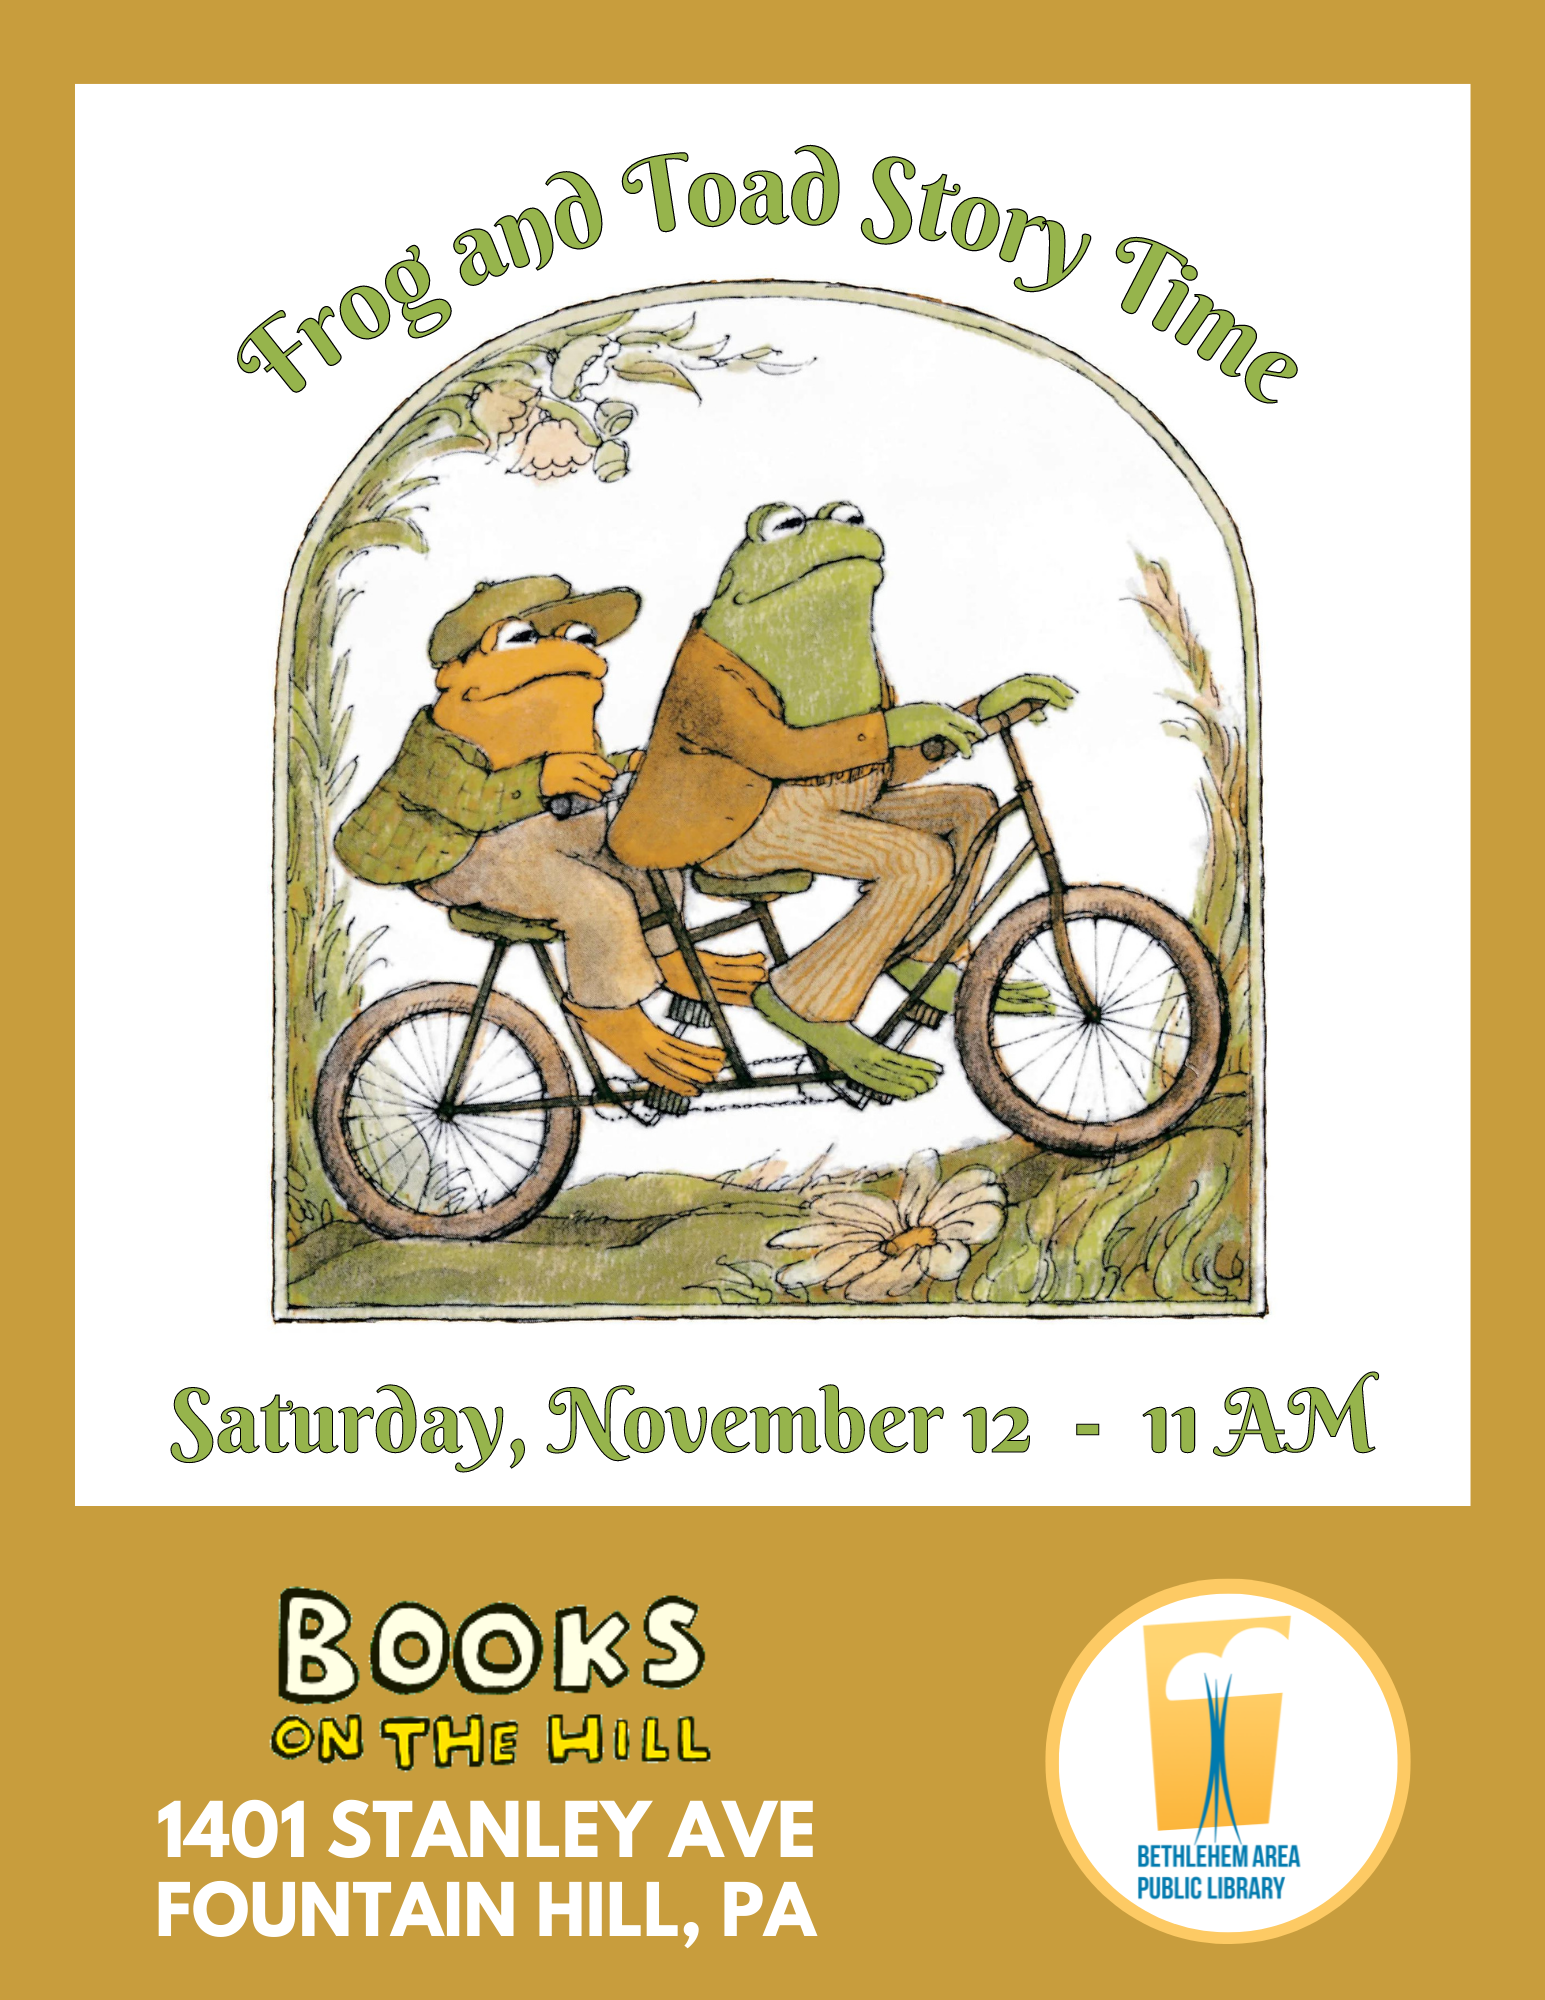 Frog and Toad Story Time - Saturday, November 12 - 11 AM